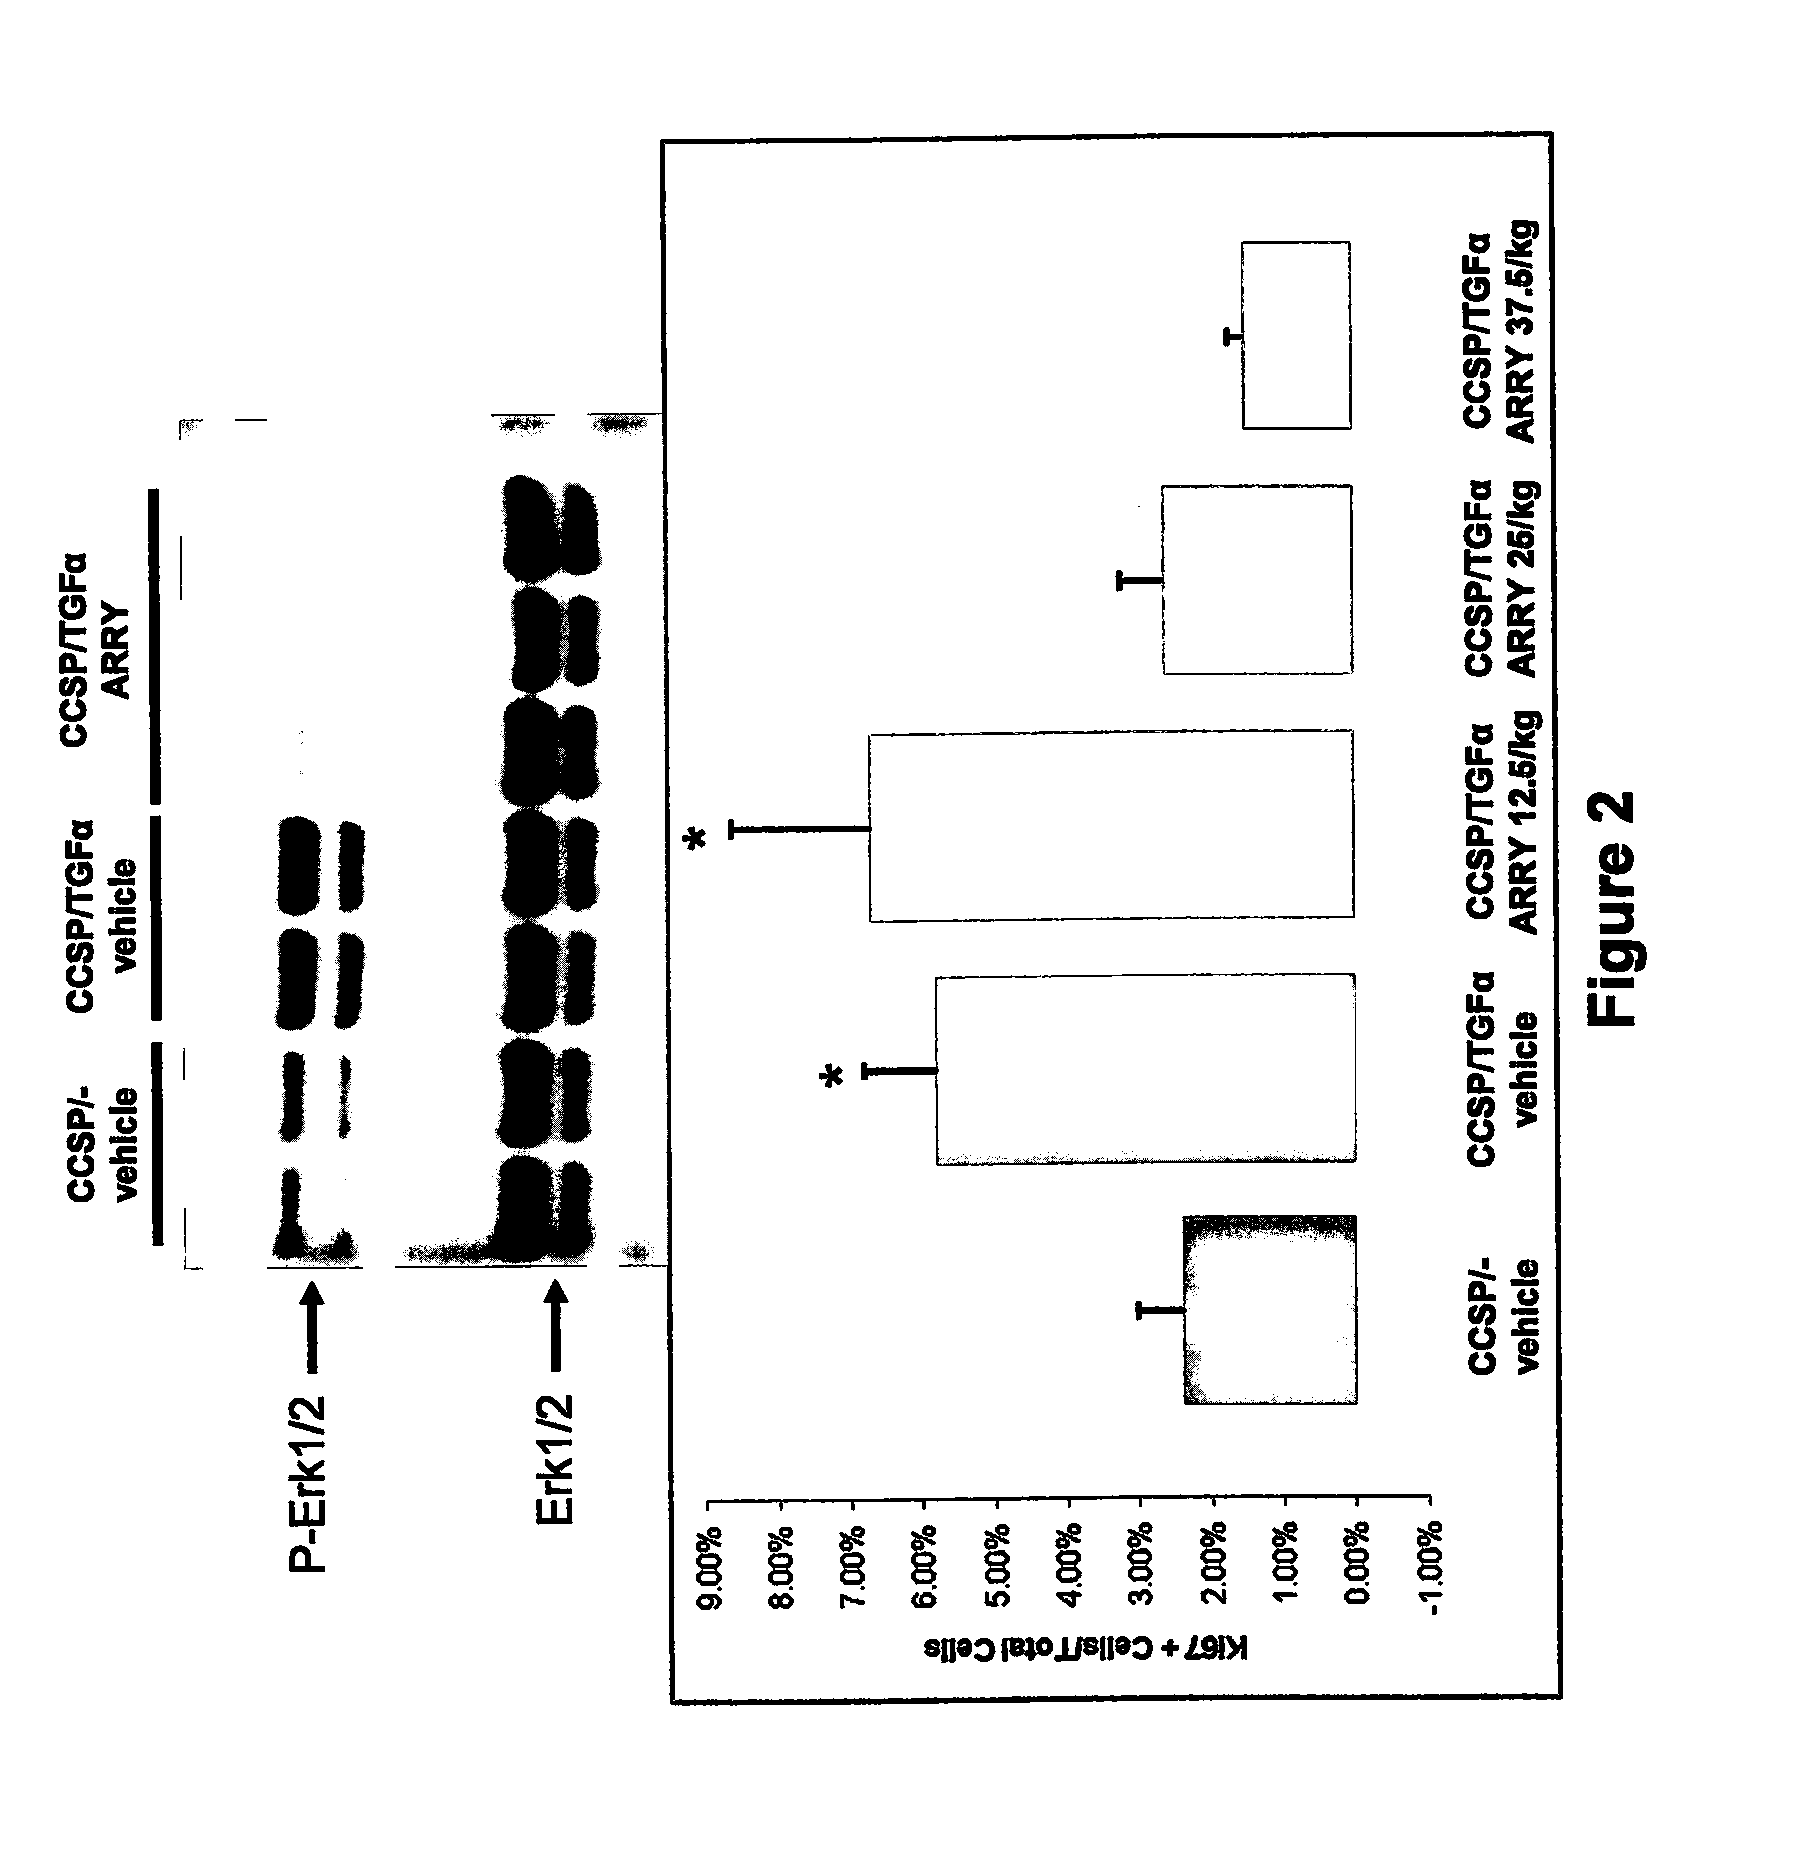 Methods and compositions of mitogen-activated protein kinase (MAPK) pathway inhibitors for treating pulmonary fibrosis